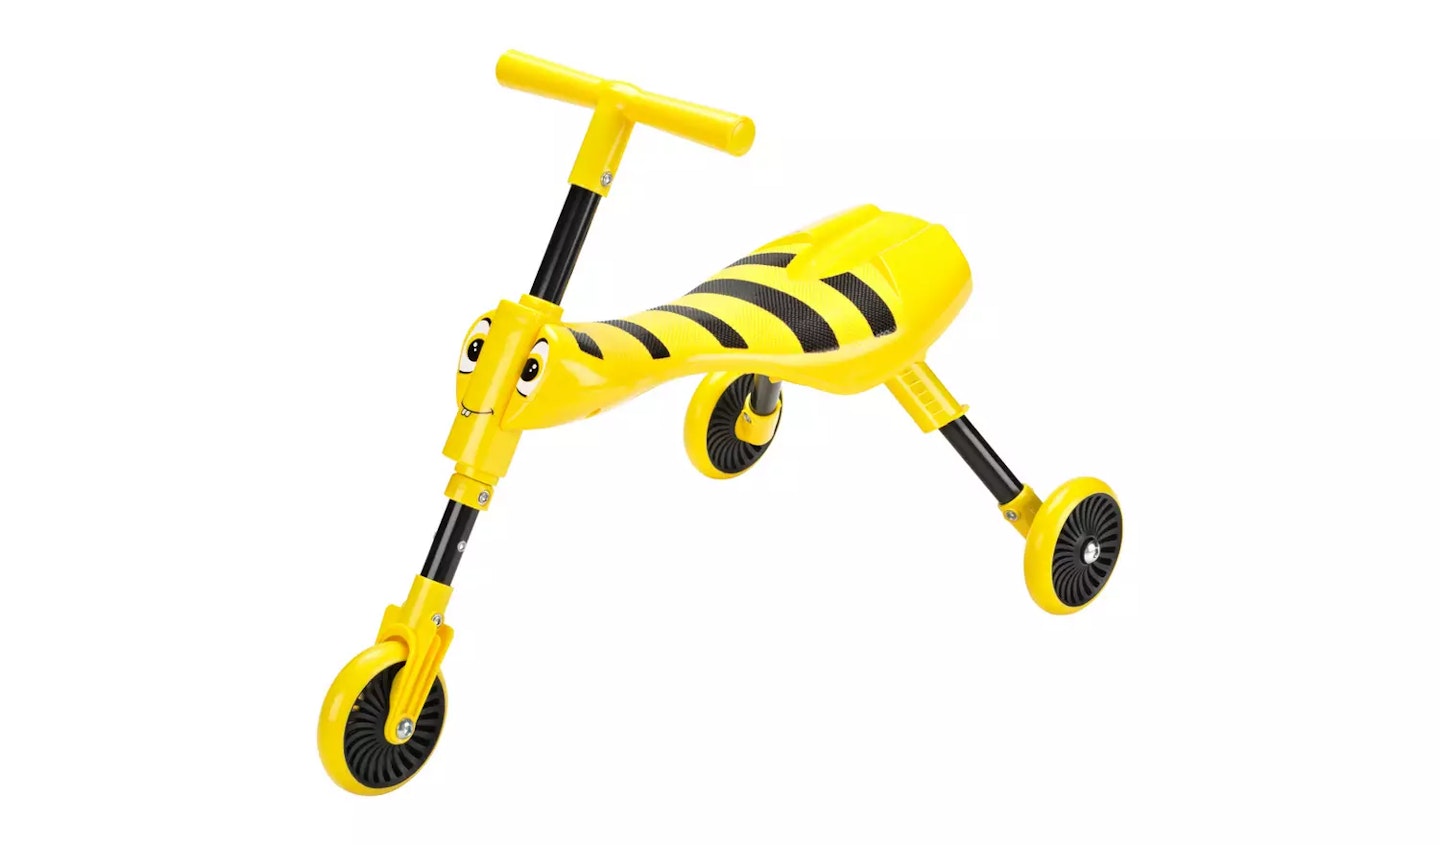 Scuttlebug Bumblebee Ride On - Yellow and Black